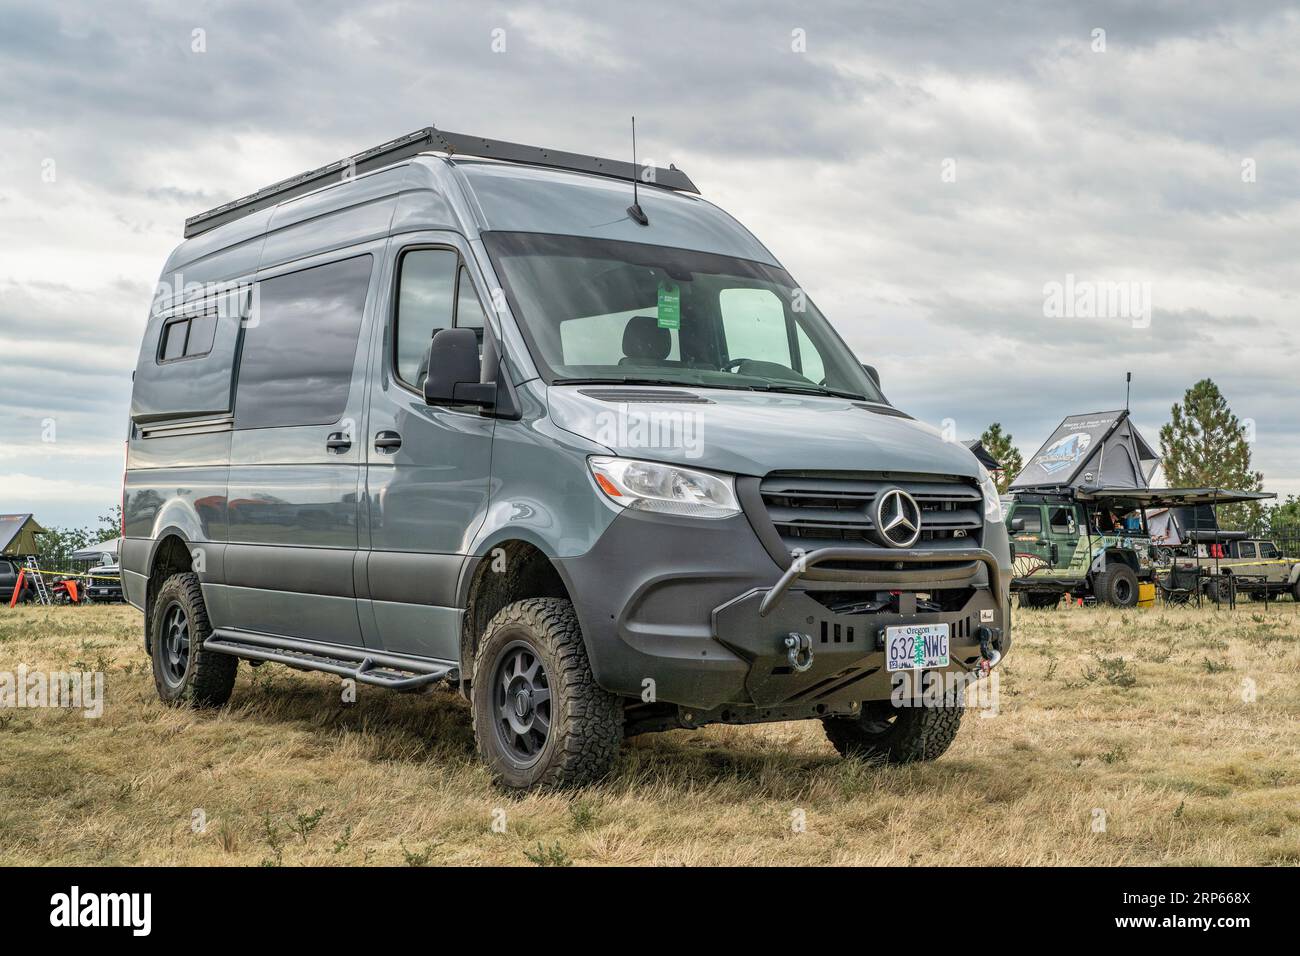 Loveland, CO, USA - August 25, 2023: 4x4 camper van on Mercedes Sprinter chassis with a custom front bumper and winch at a busy campground. Stock Photo